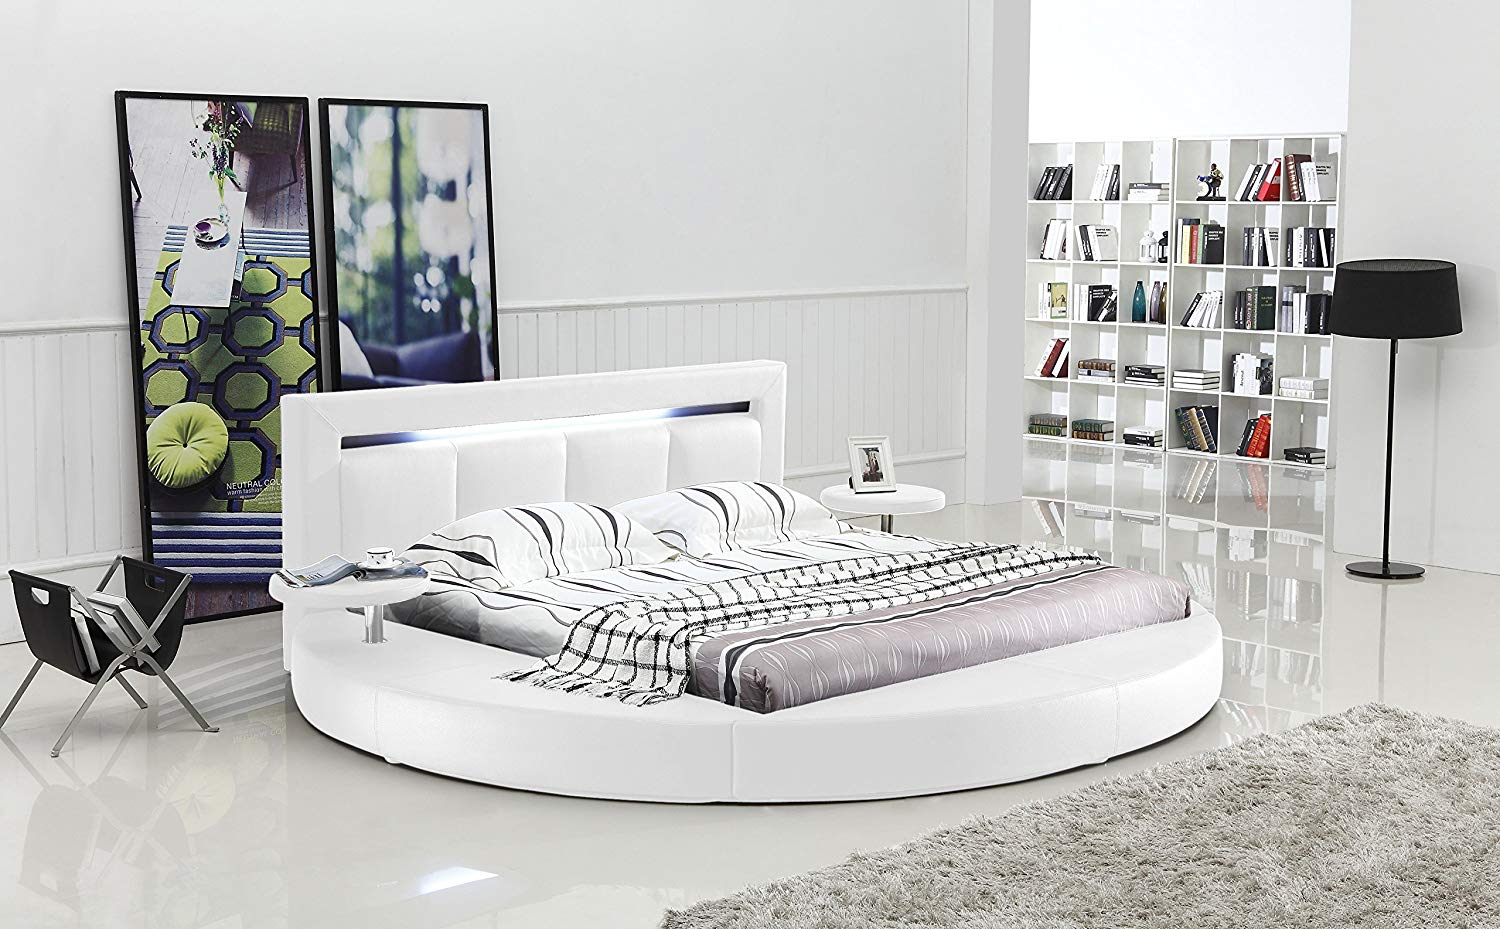 Oslo Round Bed with Headboard Lights